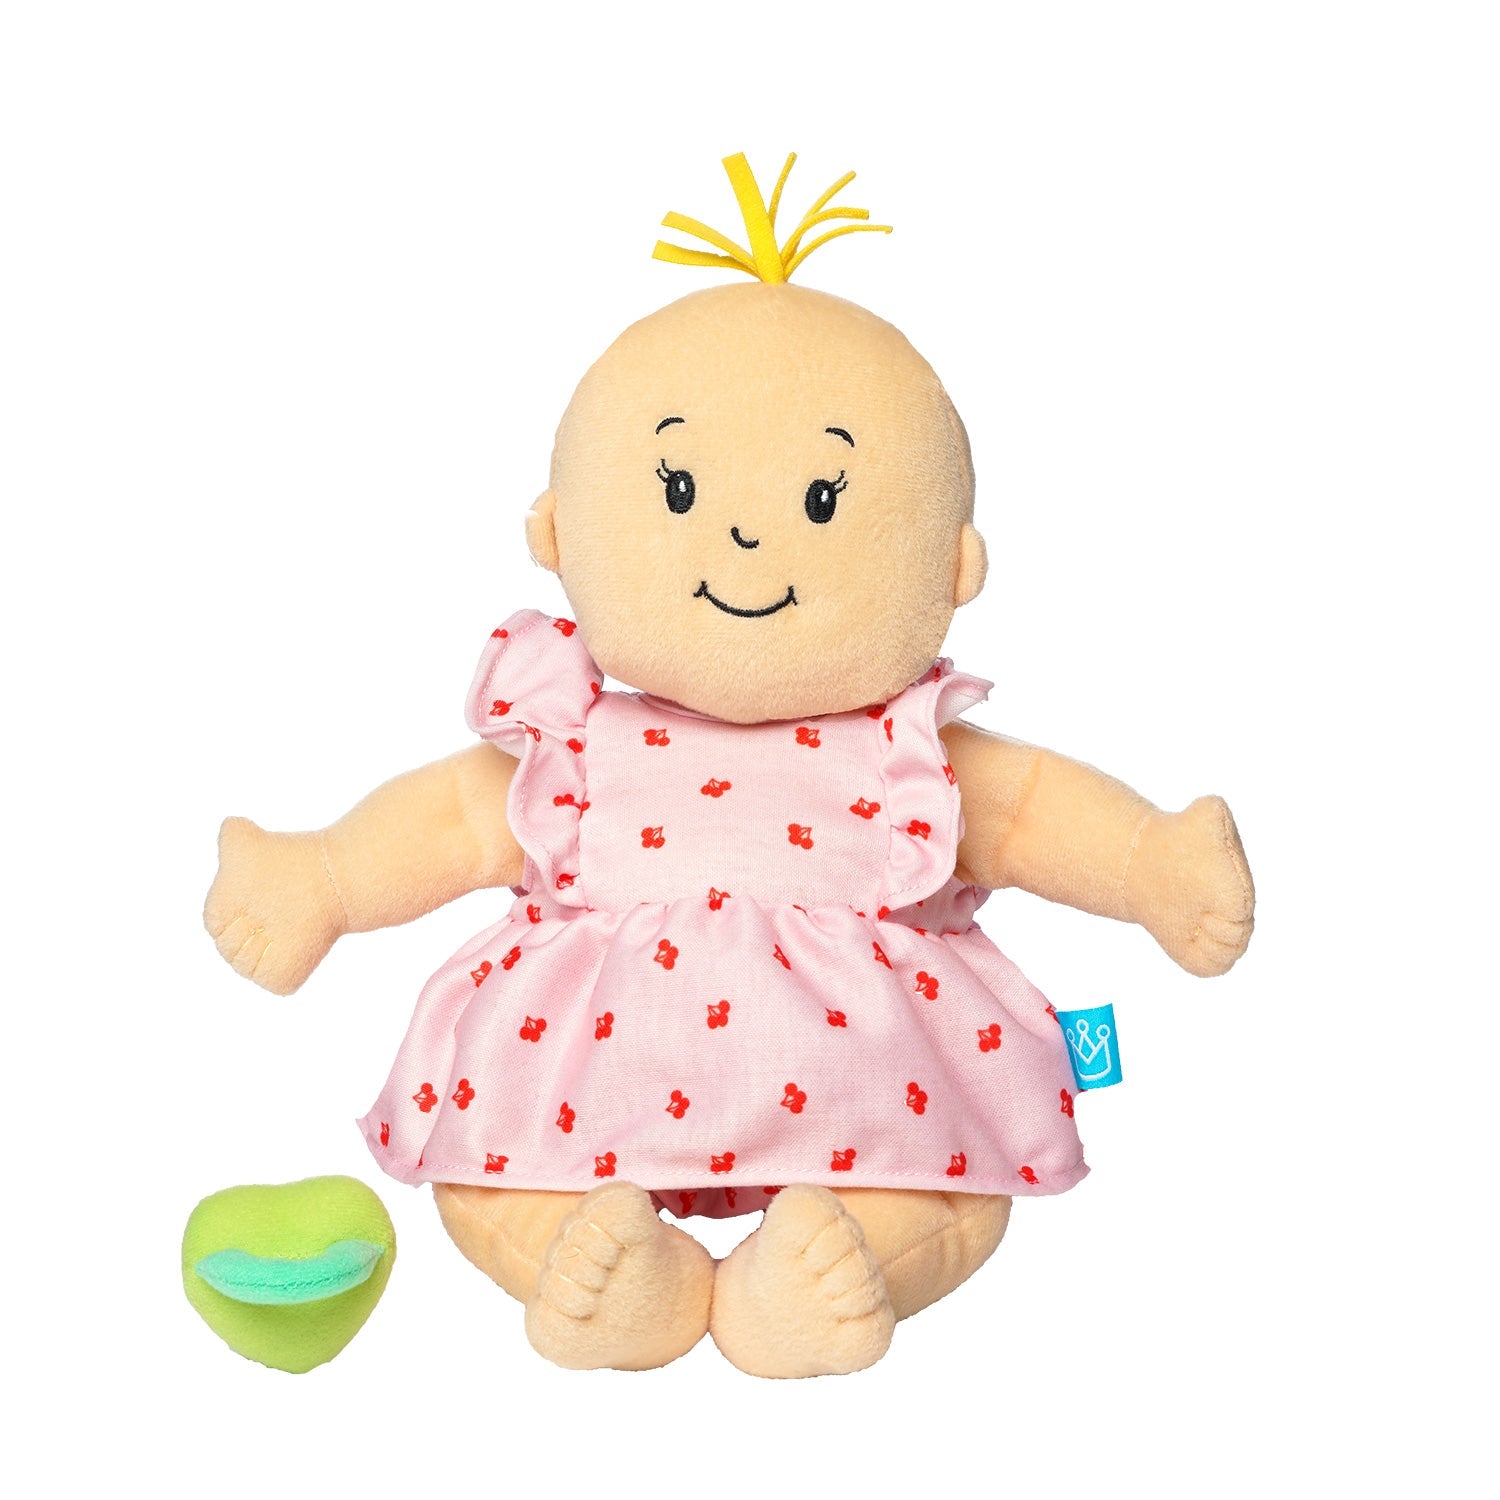 Baby Stella Peach with Blonde Hair, Exclusive Outfit, Packaged in a